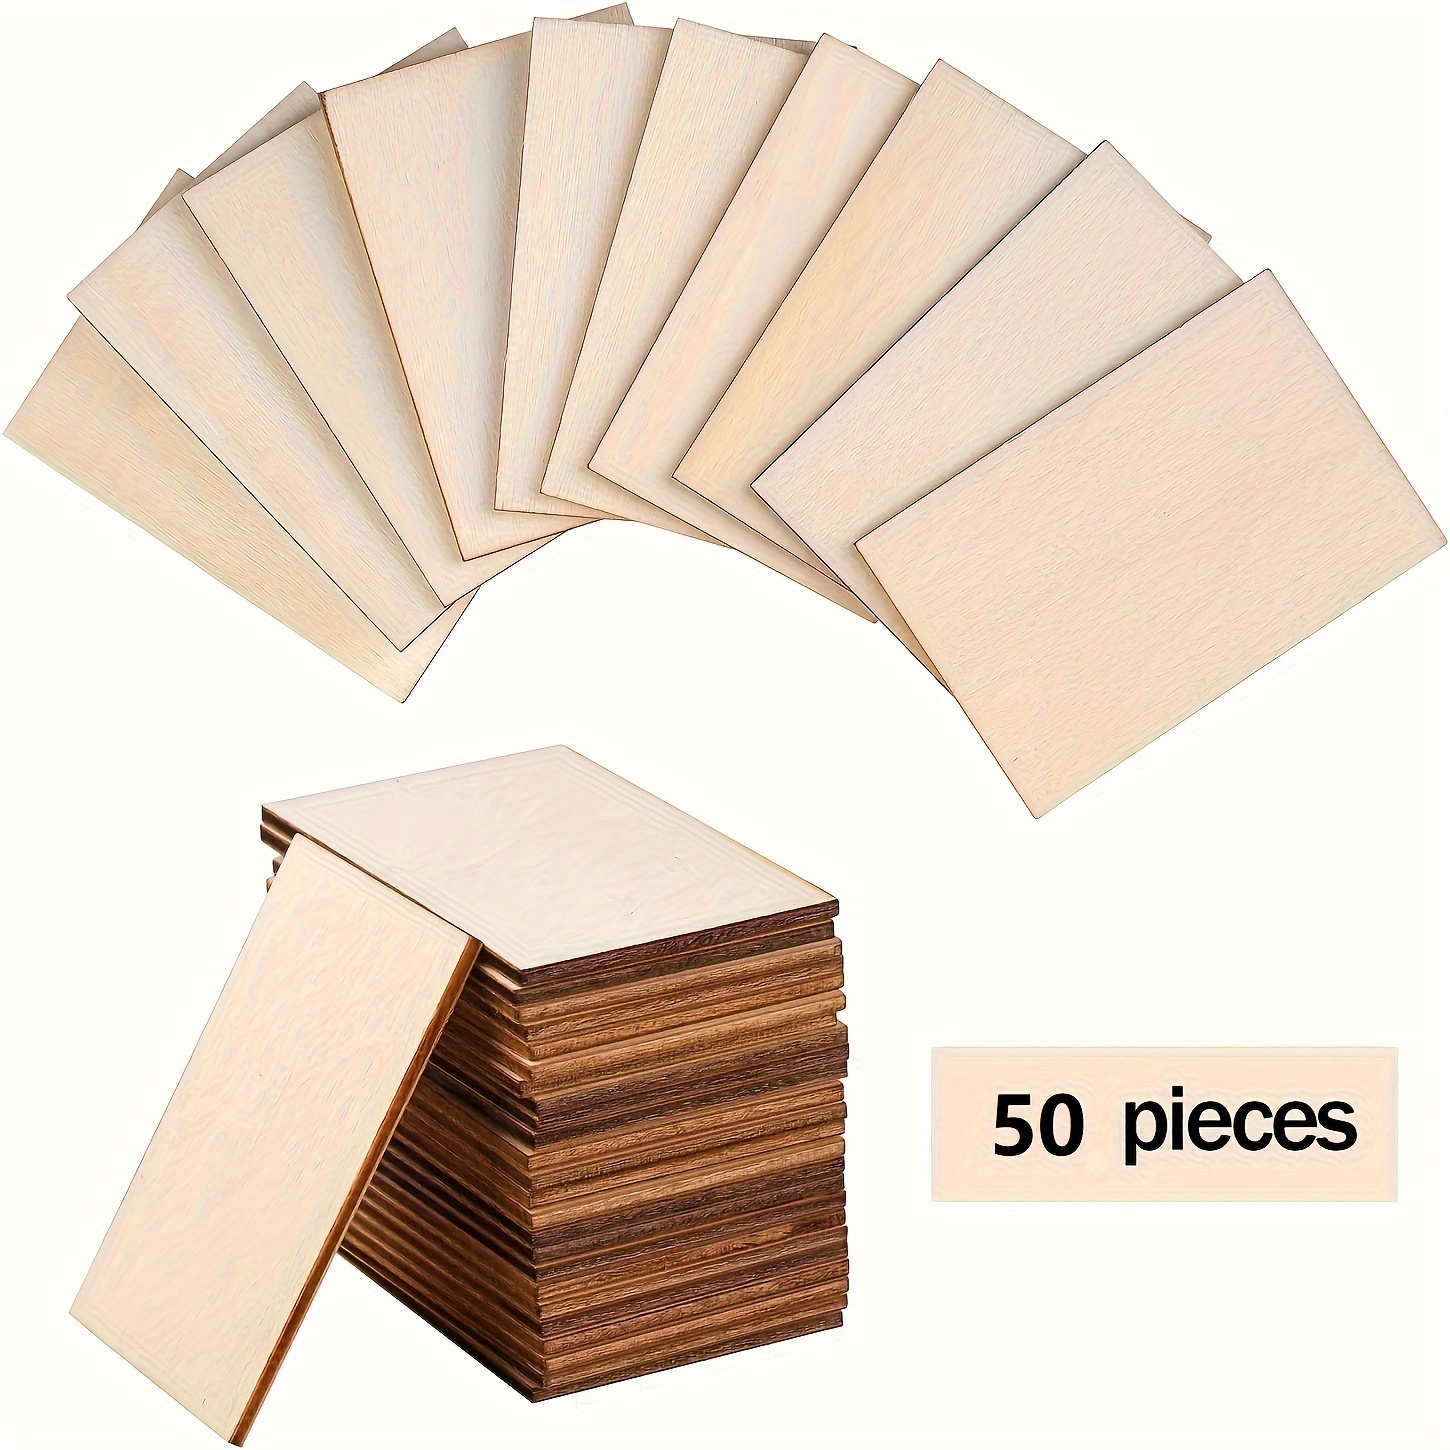 

50pcs 5x7.6cm 2x3inch Wooden Board Square Wooden Coaster Diy Crafts Painting Wooden Wood Chips Flame Decoration For Diy Art Craft Projects